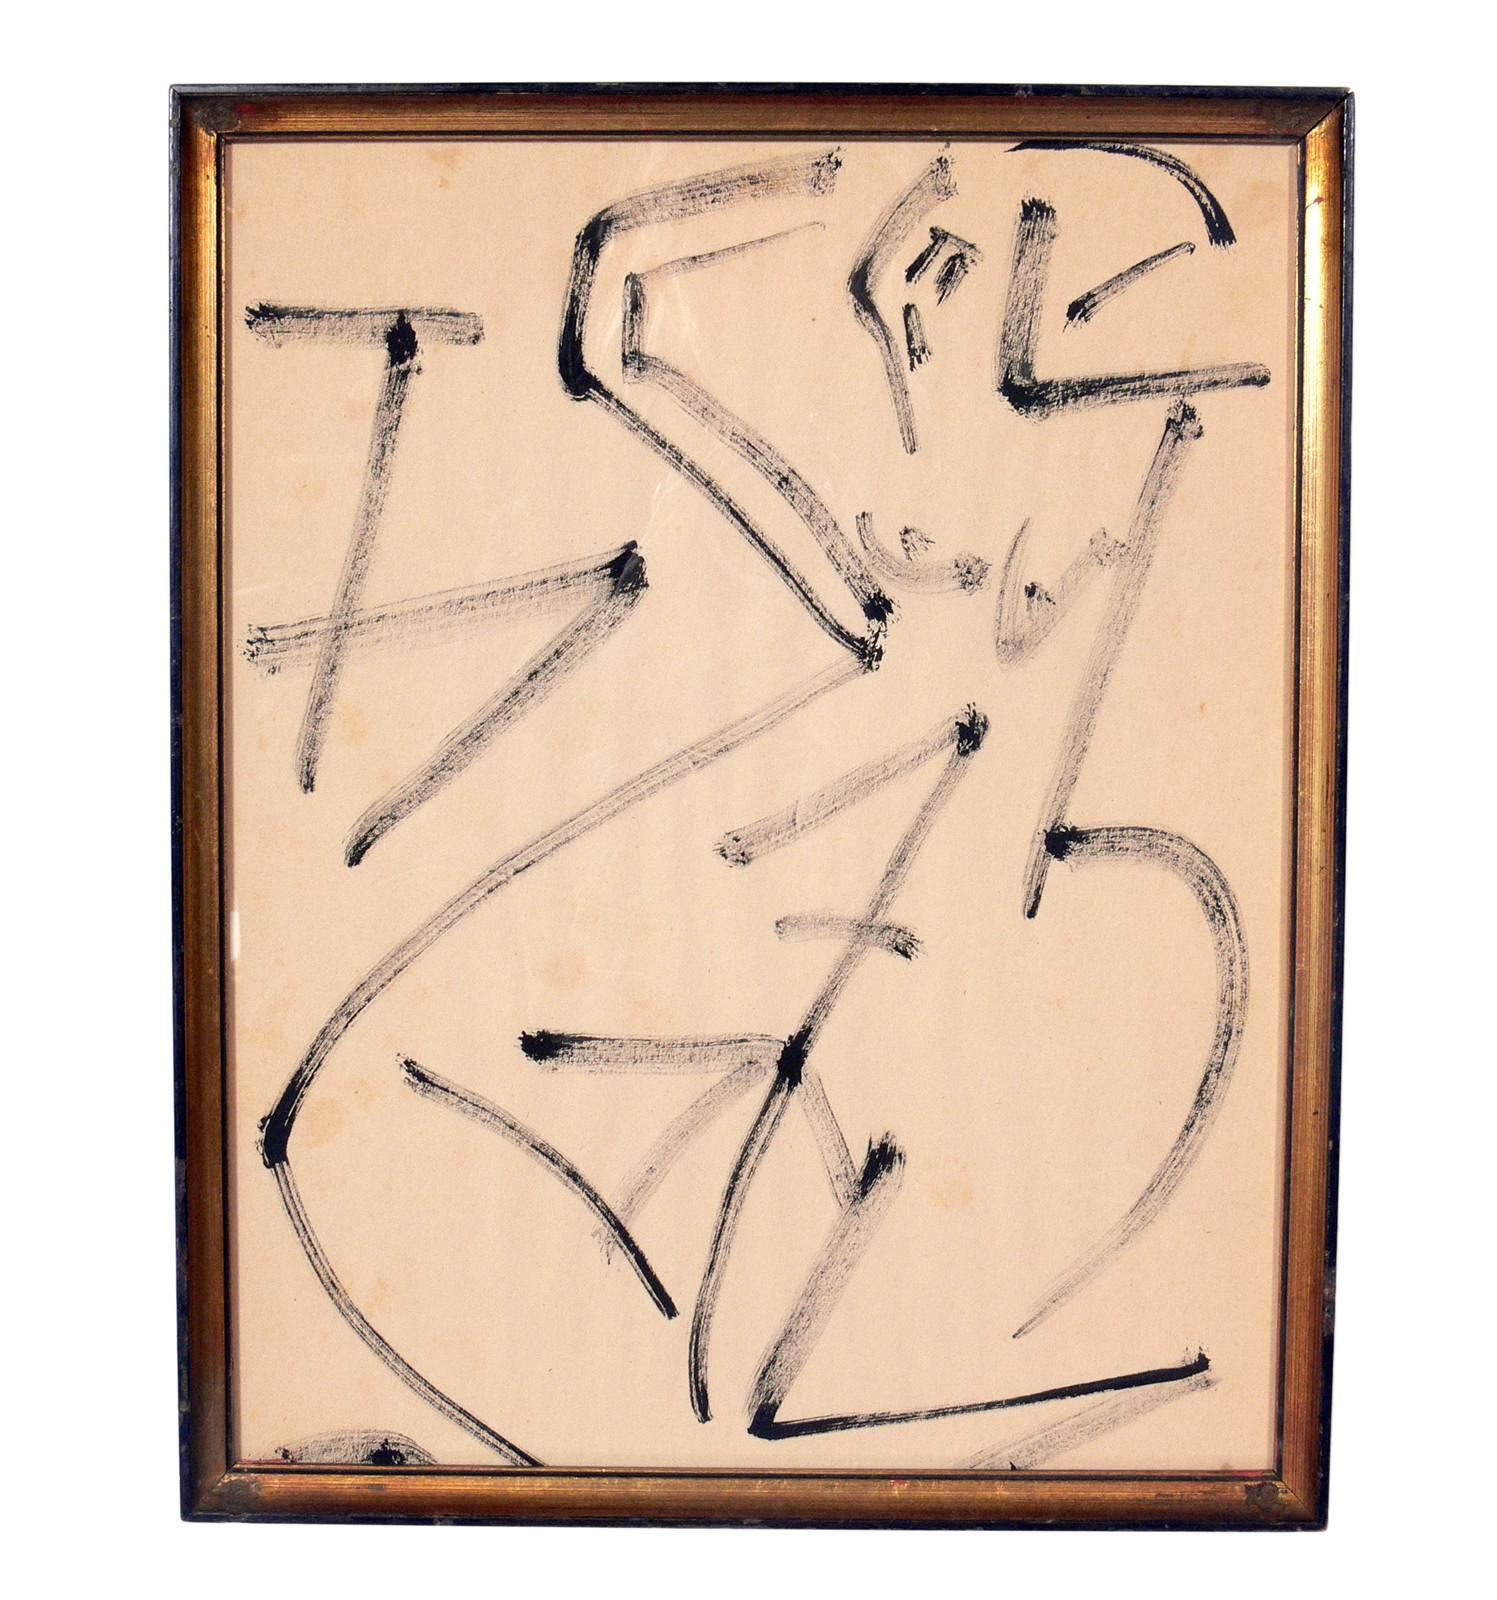 Selection of Modern Art or Gallery Wall, circa 1950s-1960s. 
From left to right, they are:
1) Abstract lithograph by Miro, from Derriere Le Miroir, circa 1950s. Seen at upper left in our first photo. It measures 14"H x 7"W.
2) Figural